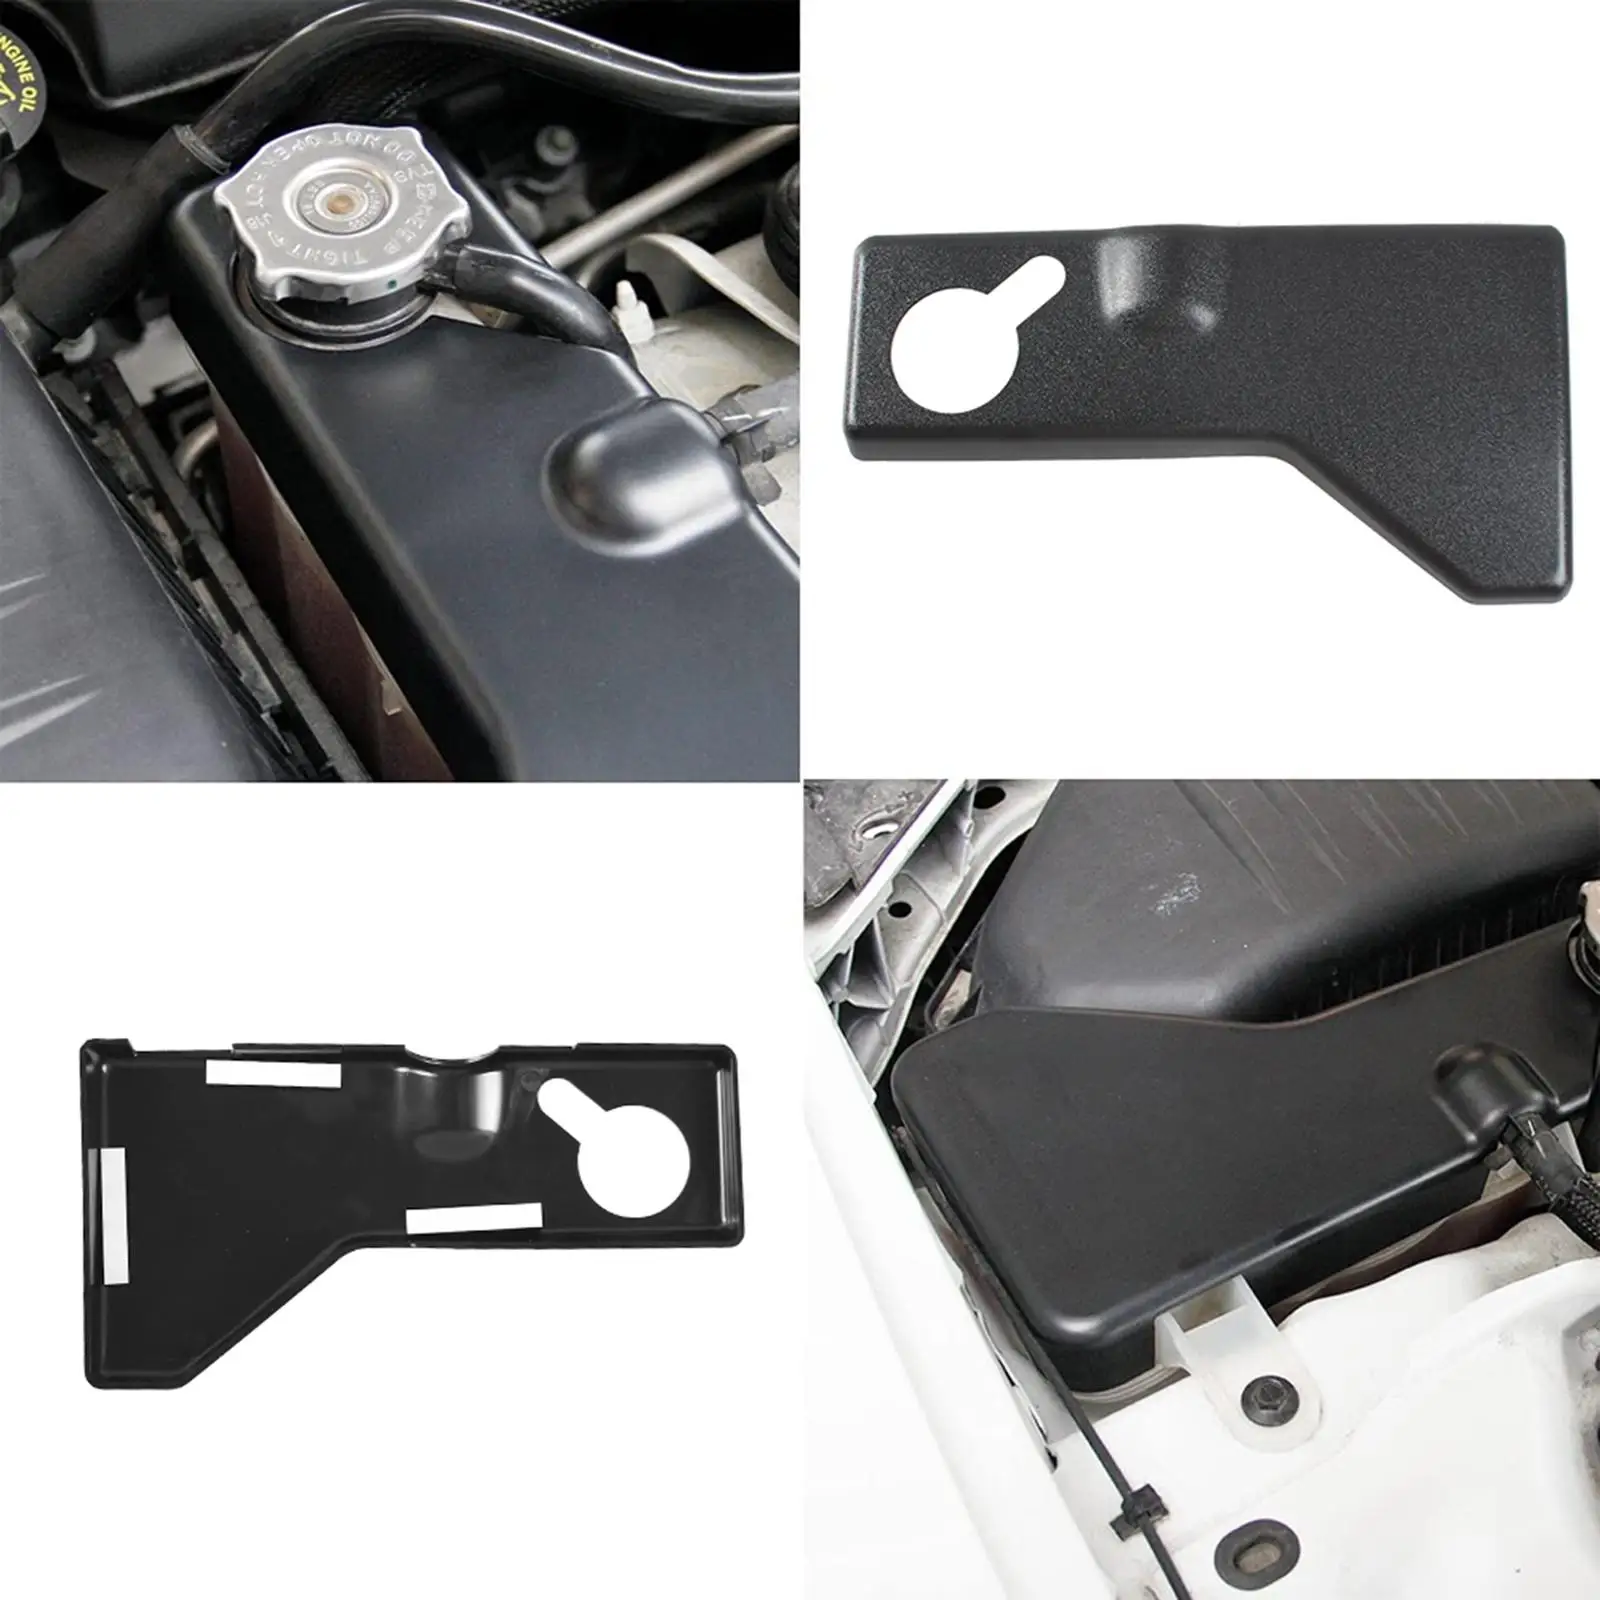 Engine Guards  Interior  Front Vehicle Parts Coolant  Dustproof Cover Decorative  for 300/ 2011 Accessories